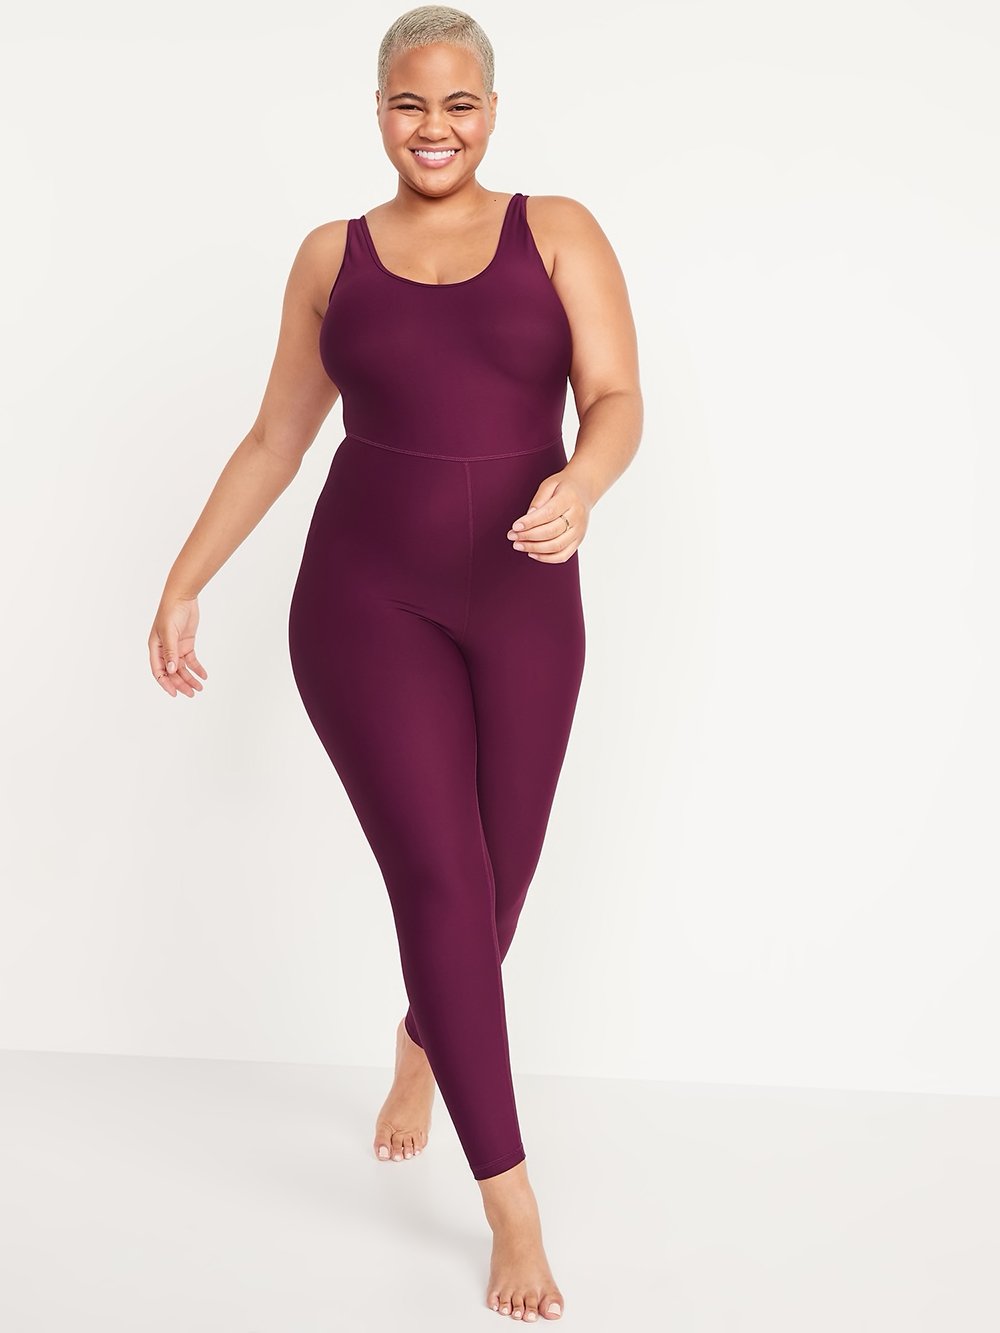 A model wearing a one-piece purple workout bodysuit from Old Navy.